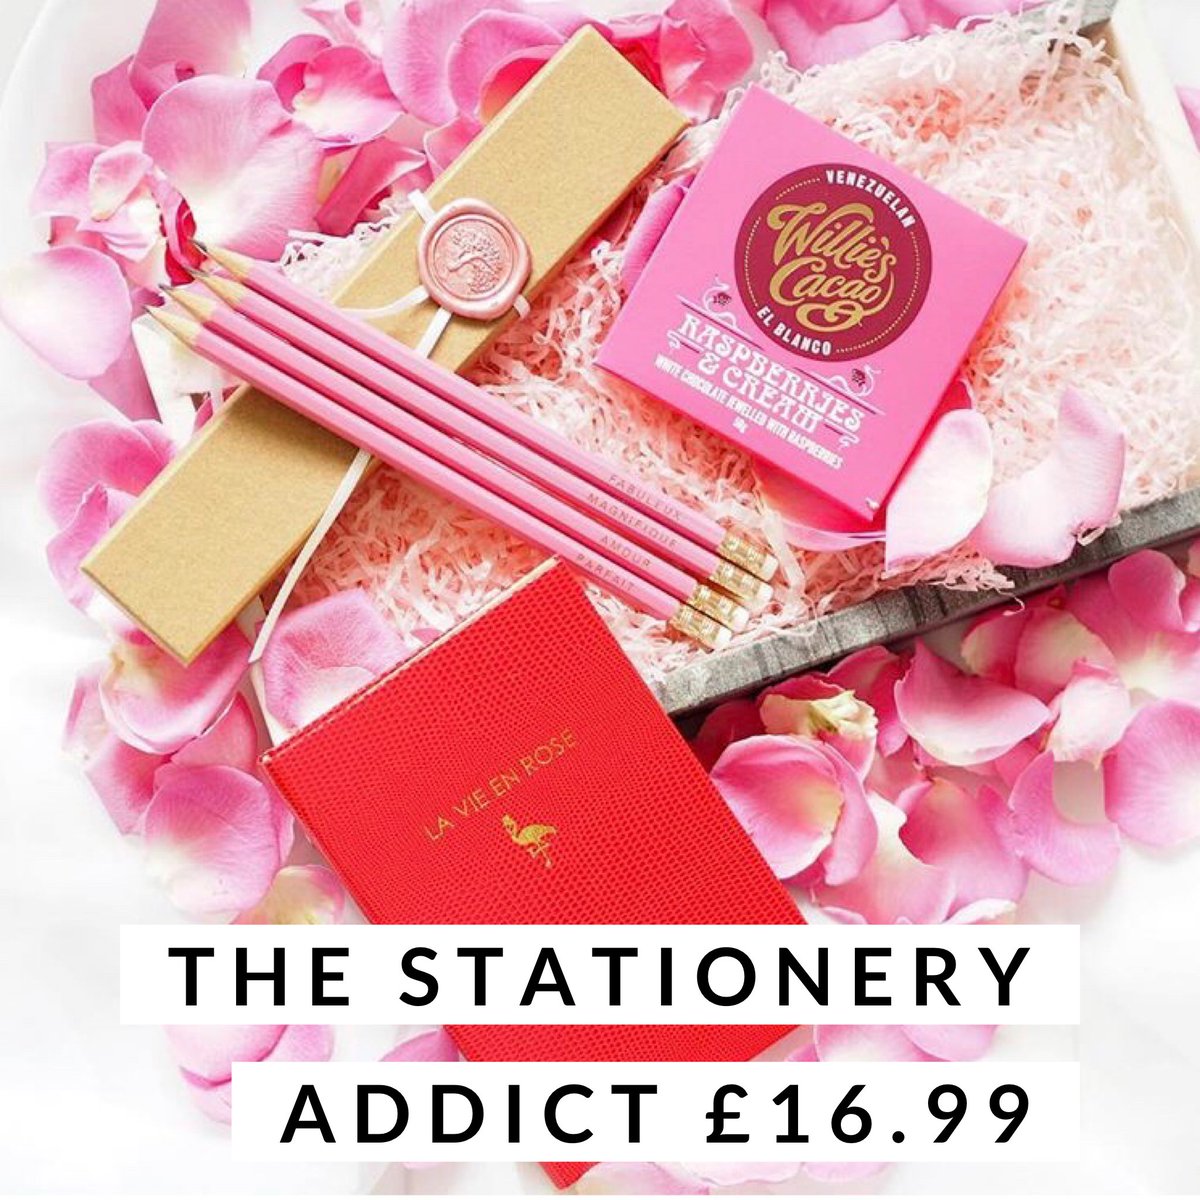 ⚡️Flash Sale!!! ⚡️

Pop over to Letterbox Luxuries for unbelievable reductions! 

letterboxluxuries.co.uk

All prices include free first class delivery. 

#UKGiftHour #ukgifthourAM 

📷 @beautybythebun